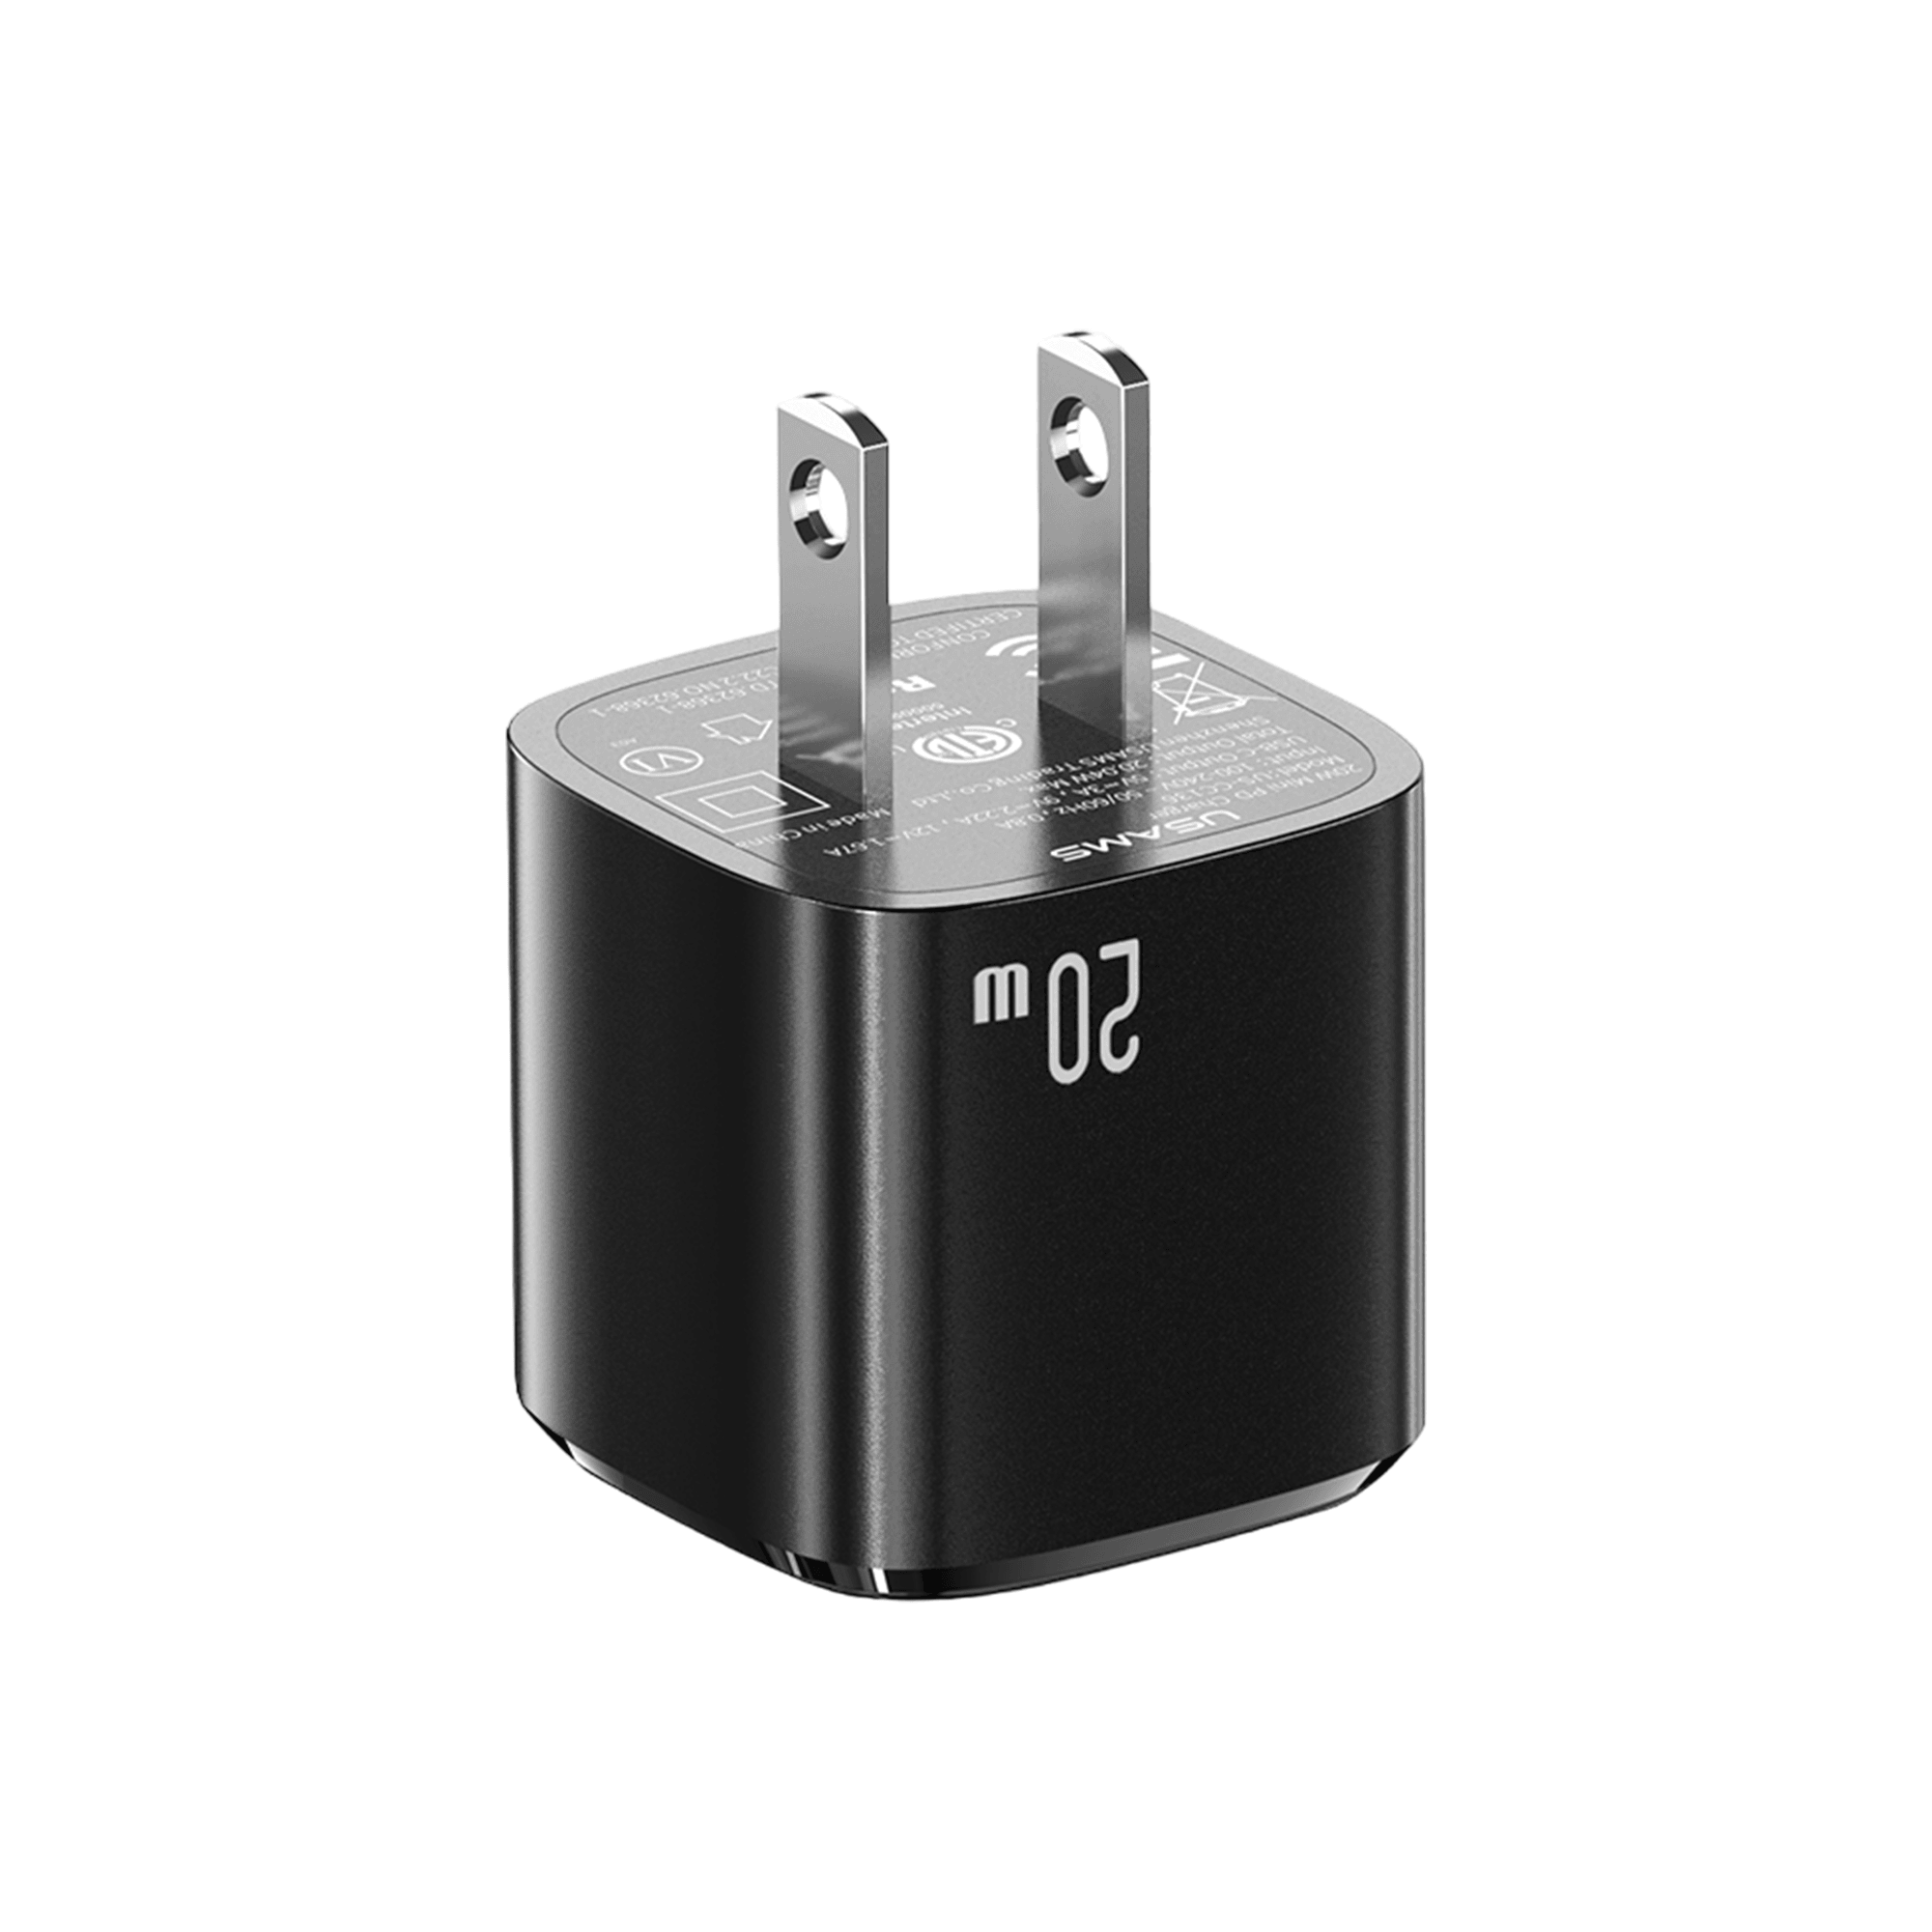 Usams USB C Charger, 20W USB-C PD Wall Charger, White